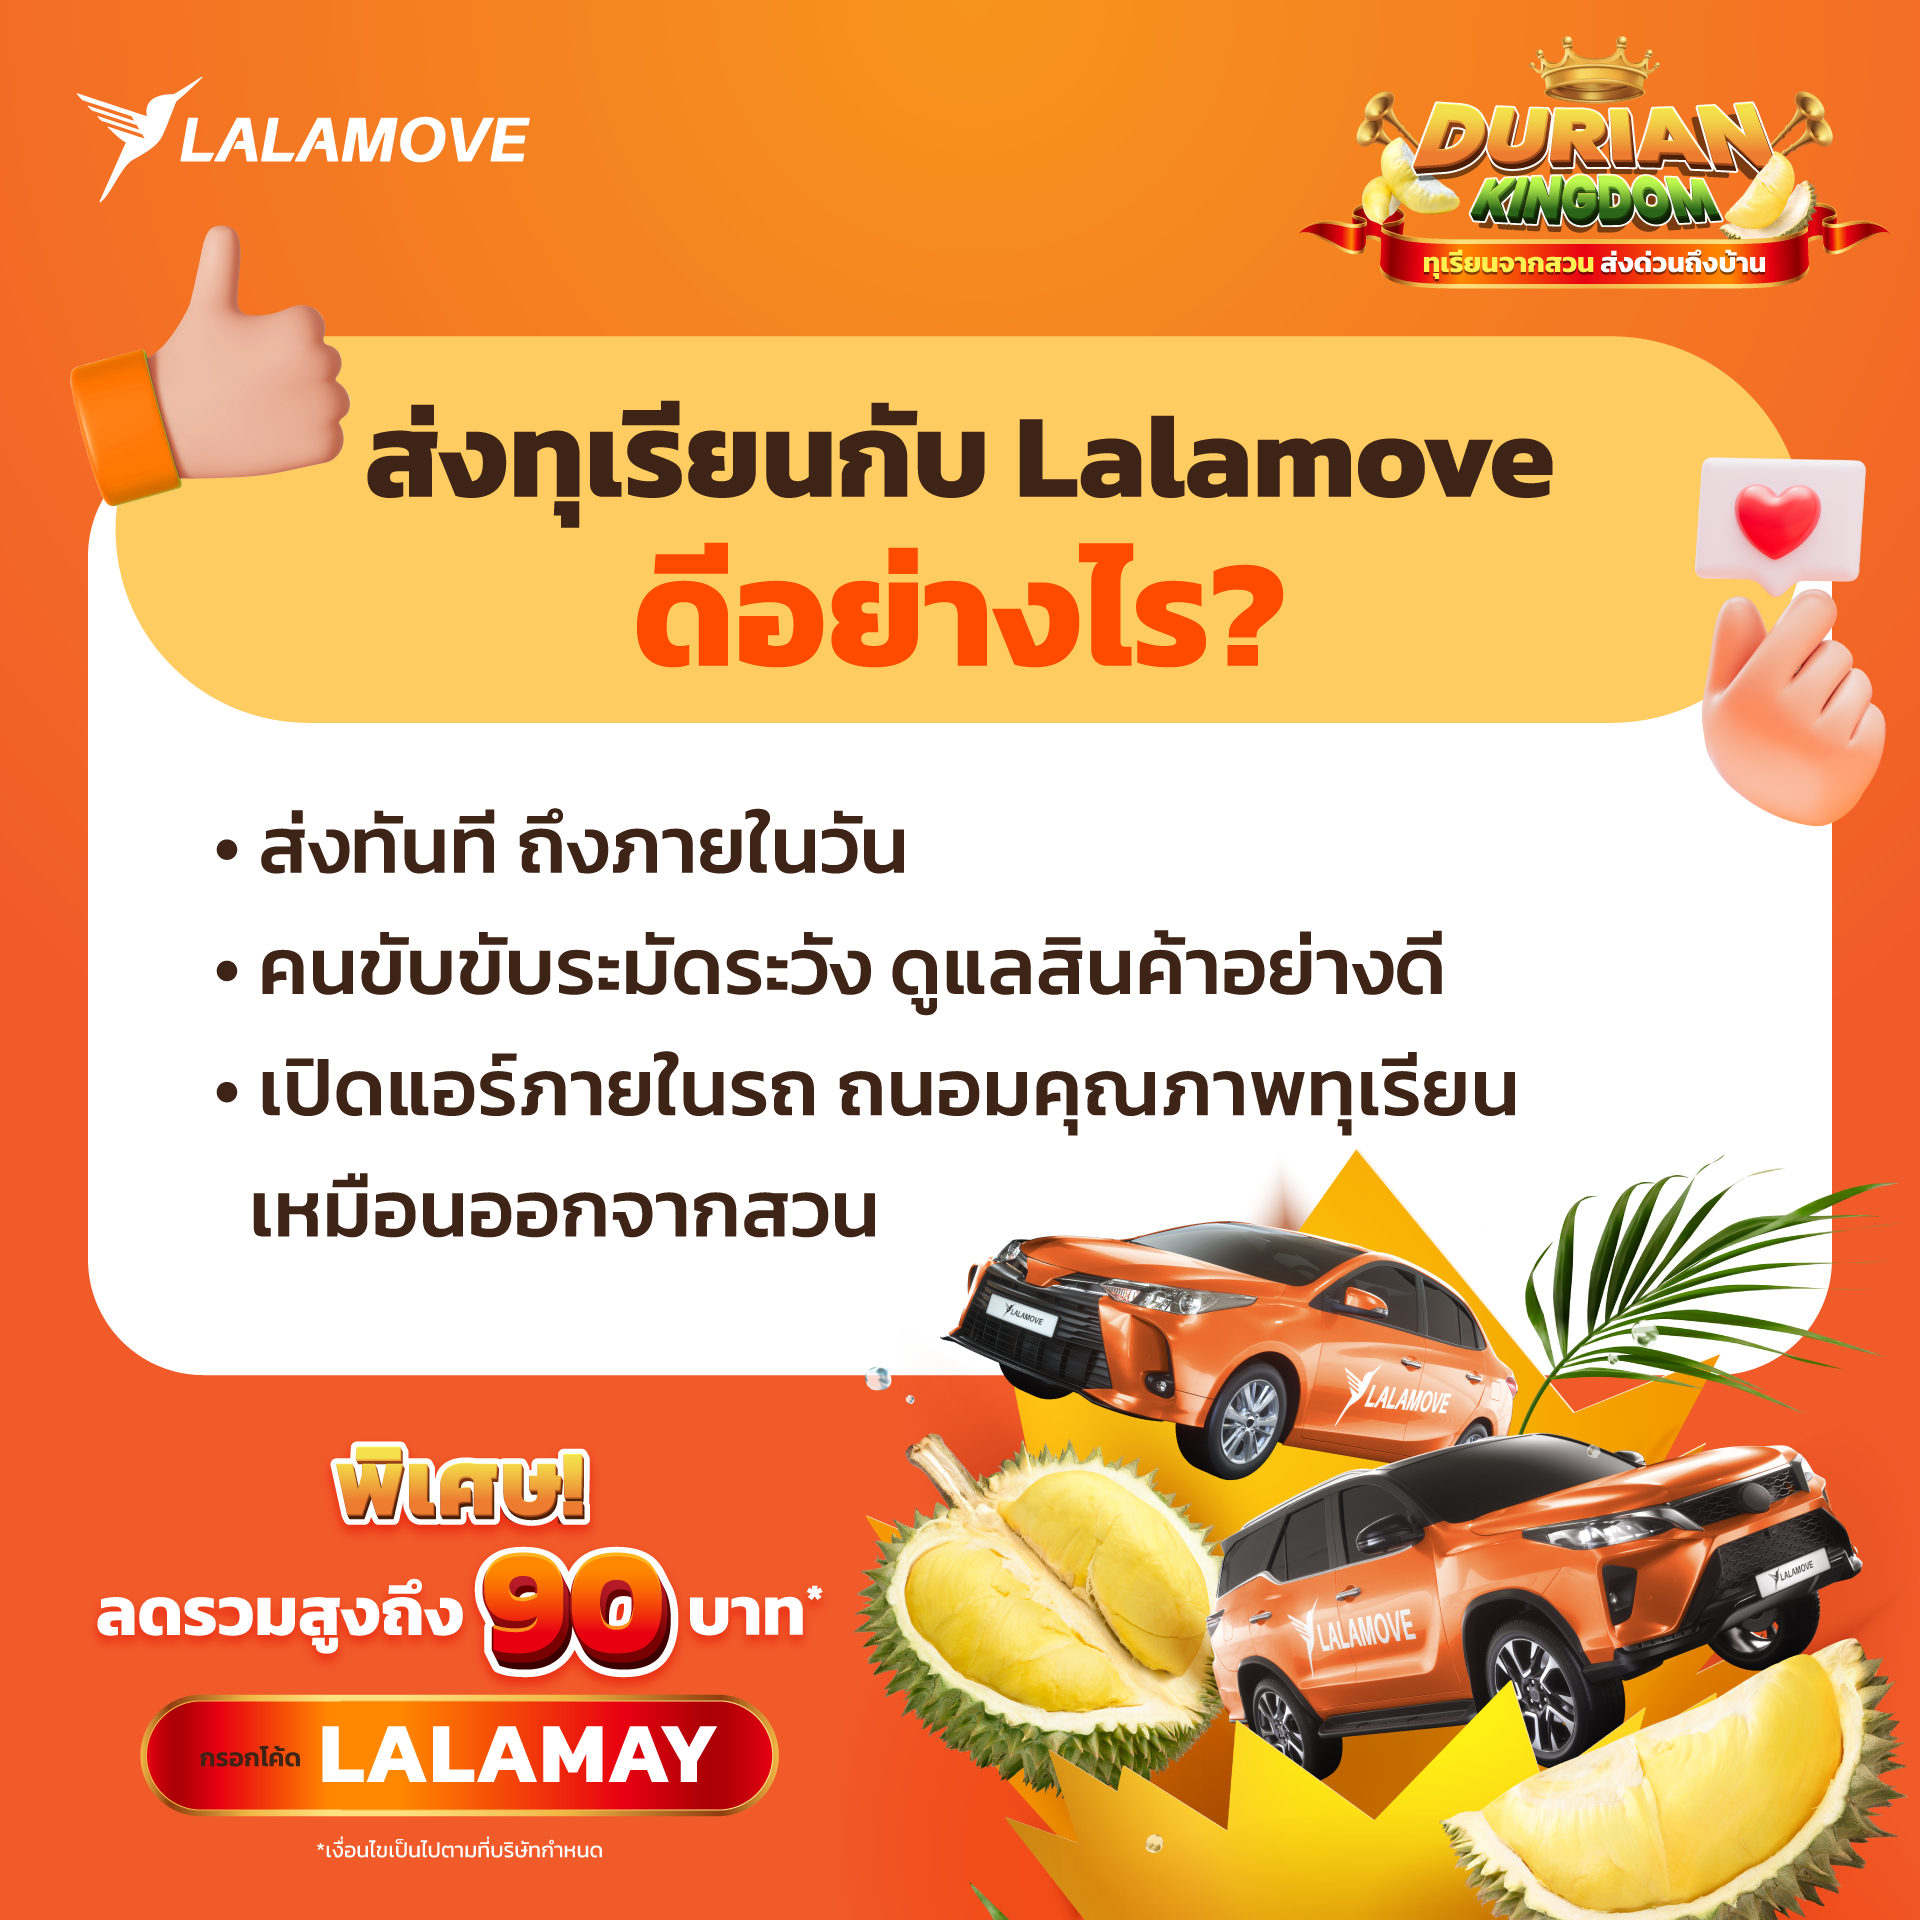 Benefits for using Lalamove service to deliver Durian